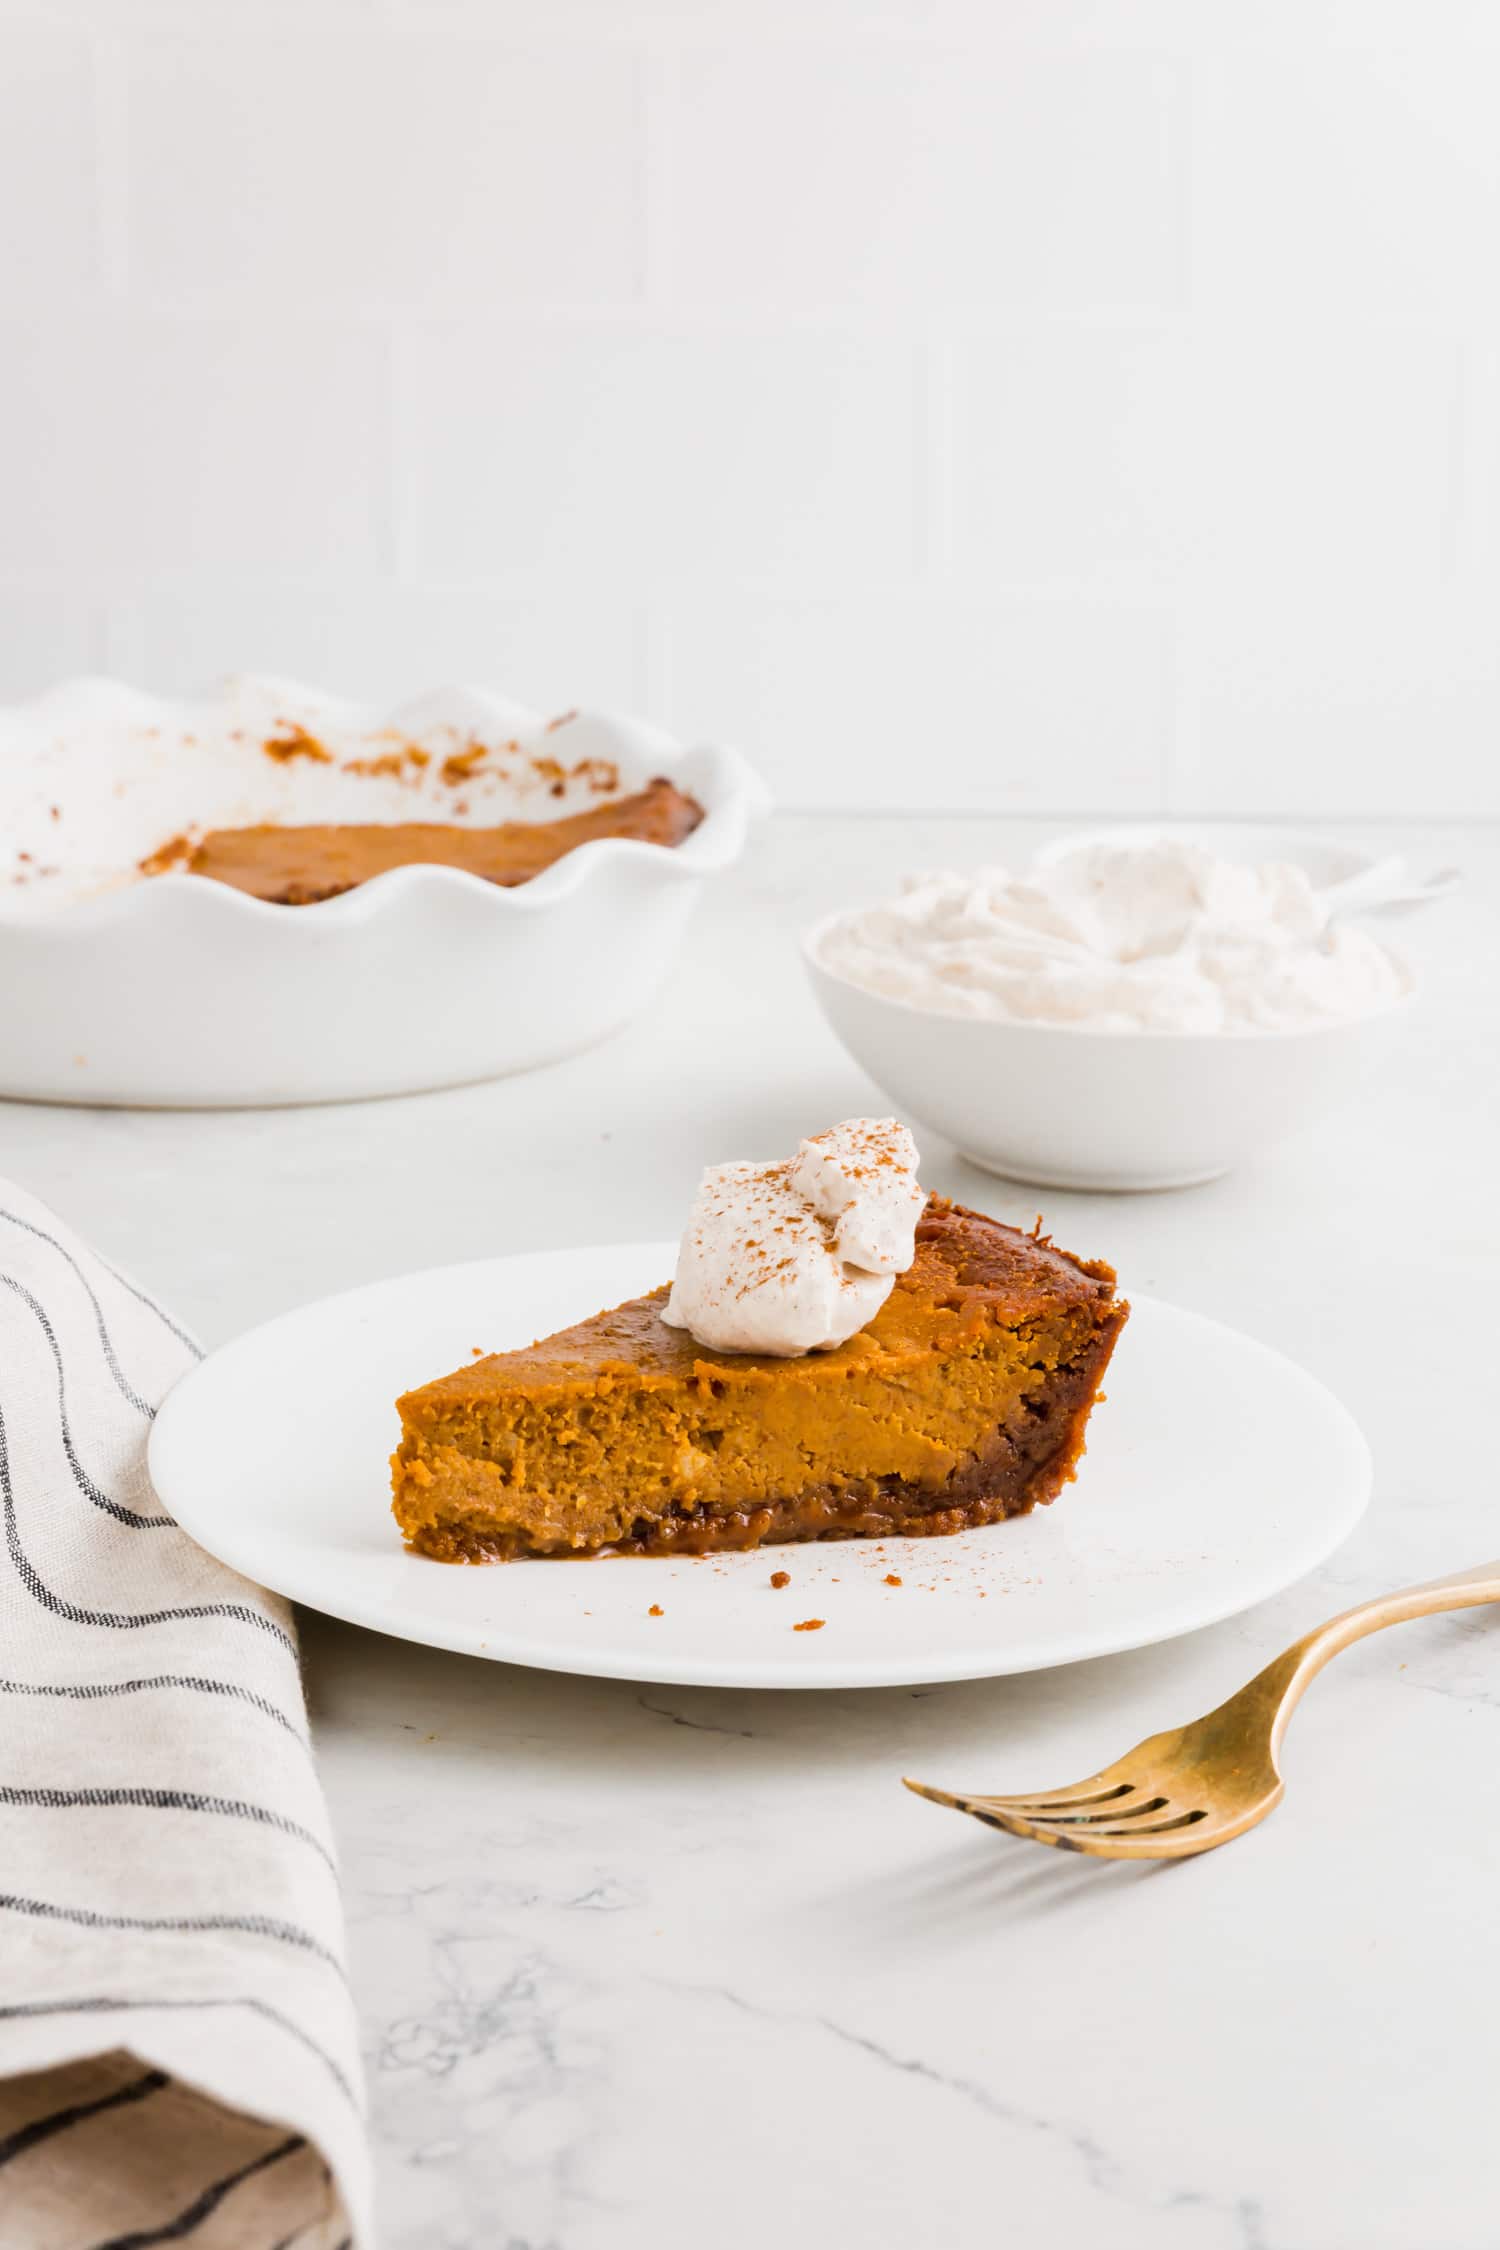 A photo showing a piece of pumpkin pie with gluten-free graham cracker crust on a plate with a dollop of whipped cream on top.